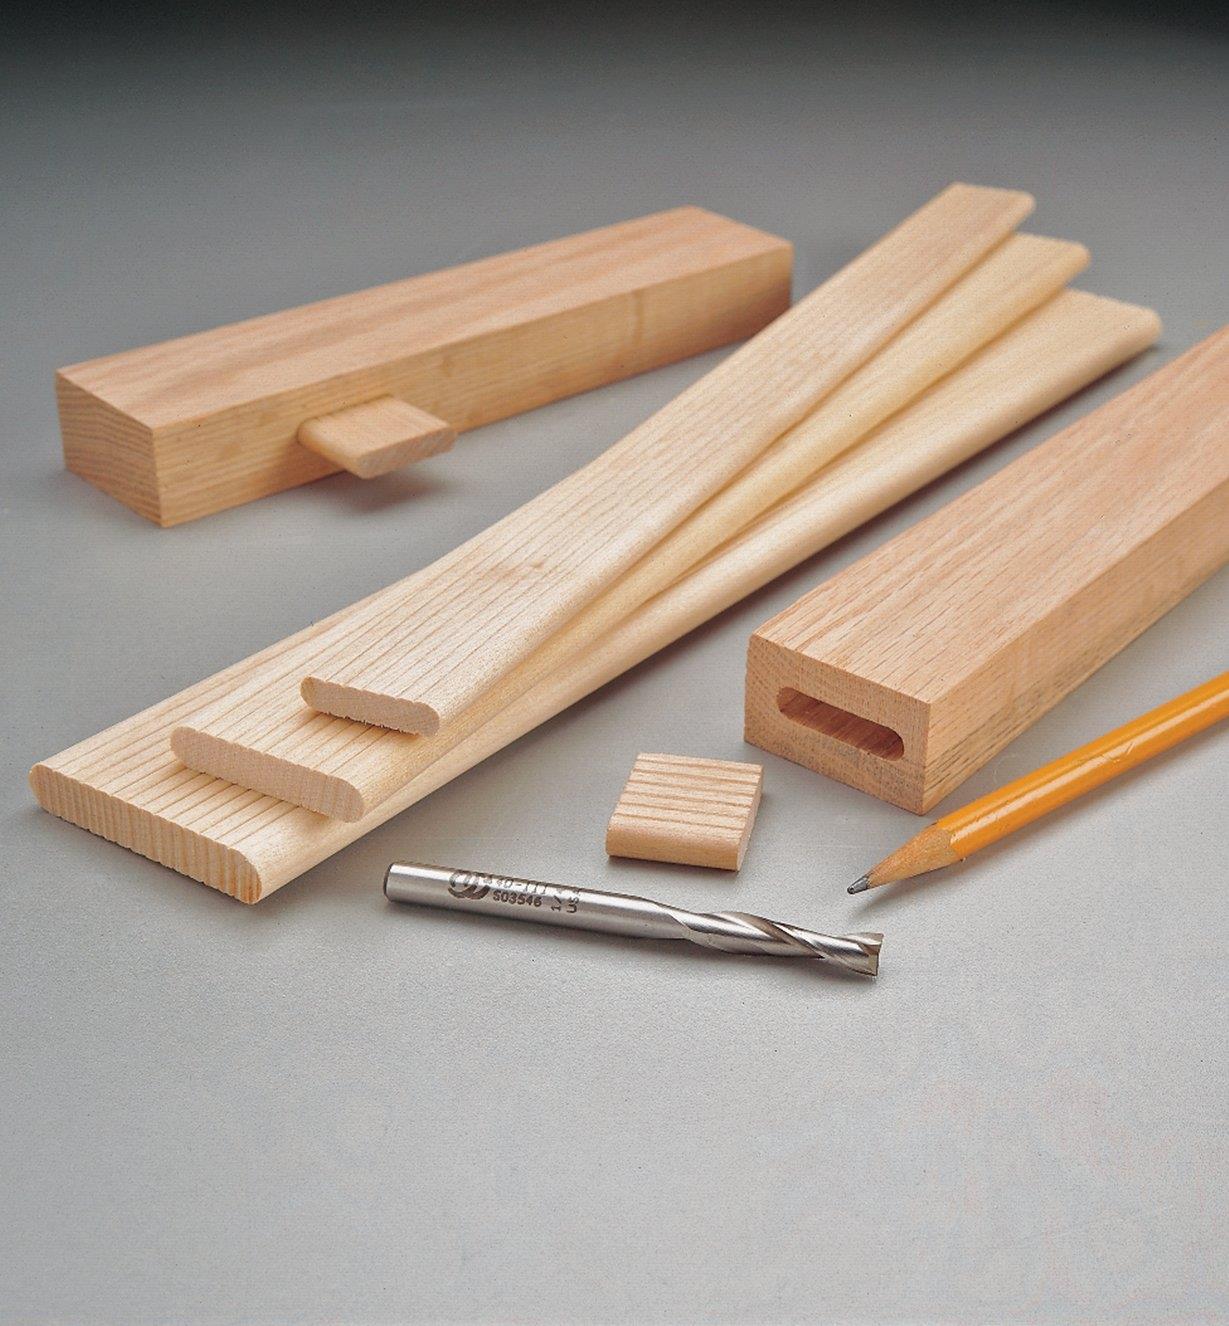 Three sizes of 12" floating tenons sitting next to two tenons cut to size with matching mortises